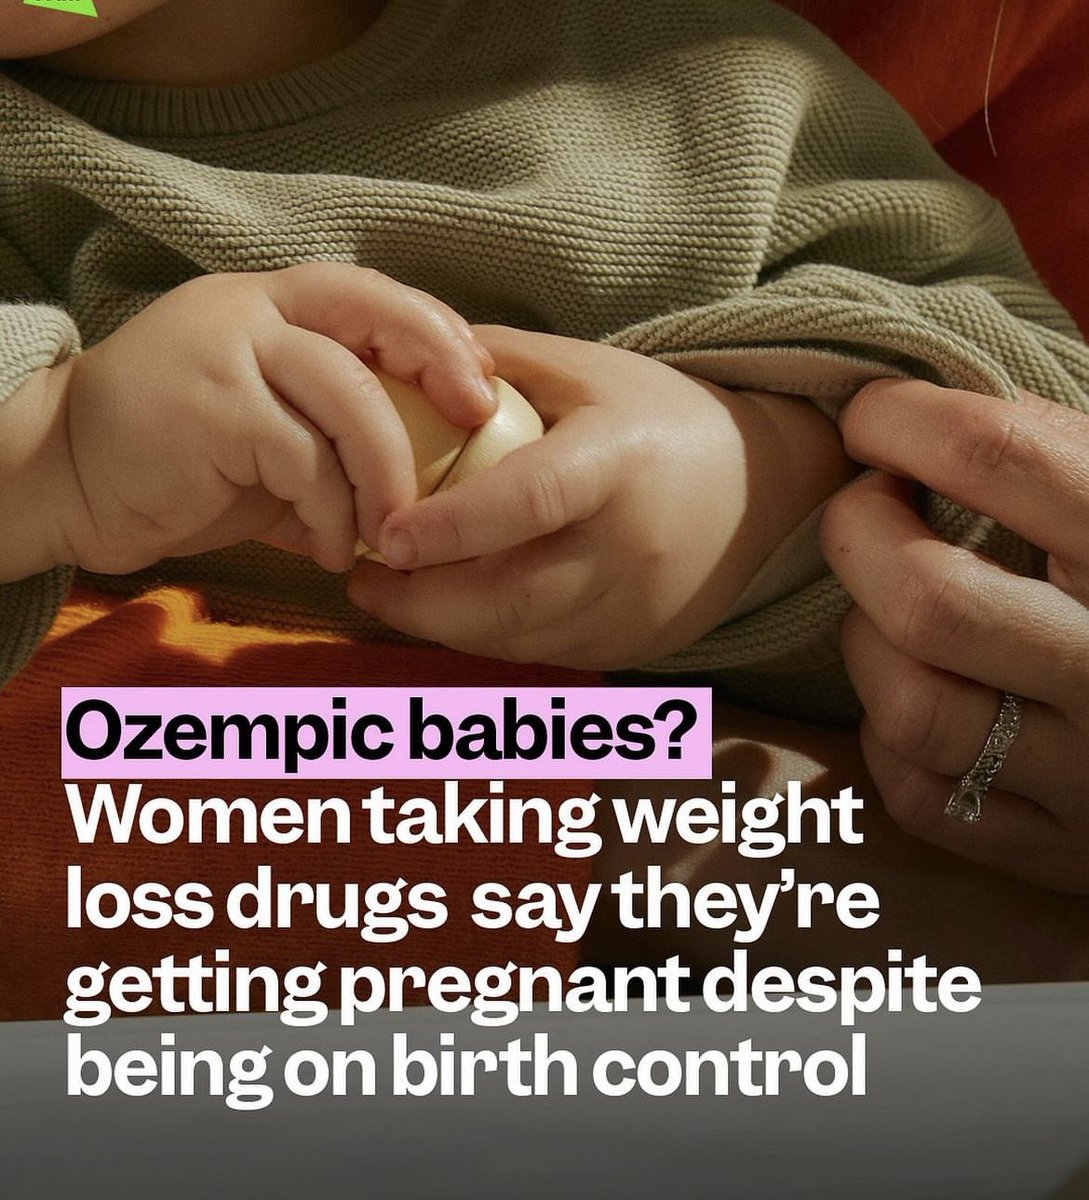 So as well as weight loss, slowing Alzheimer’s, lessening people’s booze and nicotine intake, reducing inflammation and other chronic pain, Ozempic is also single-handedly solving the fertility crisis. I never use this word but… based